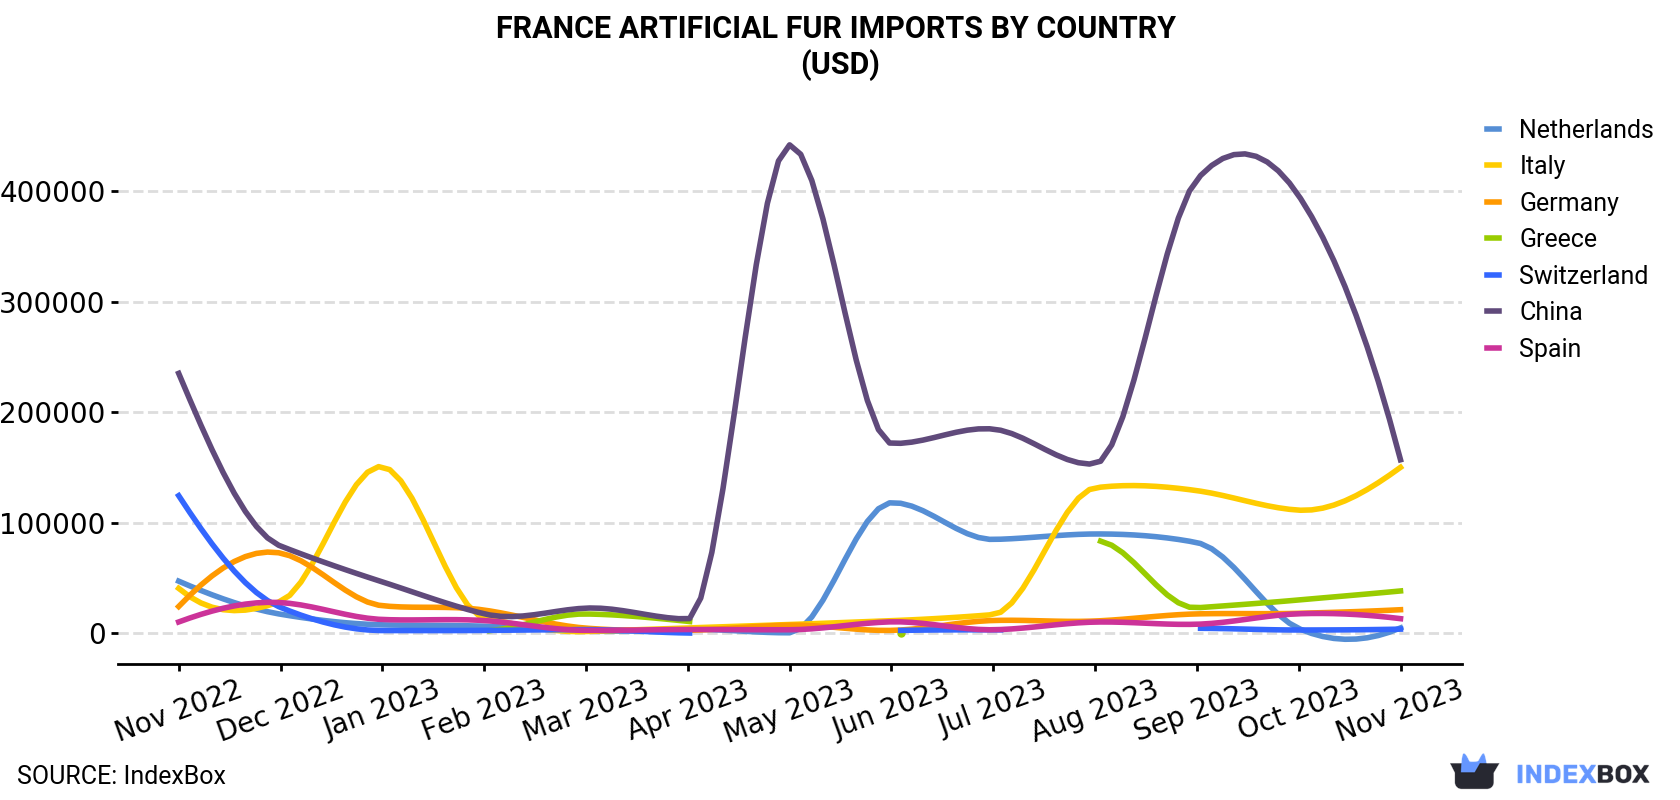 France Artificial Fur Imports By Country (USD)